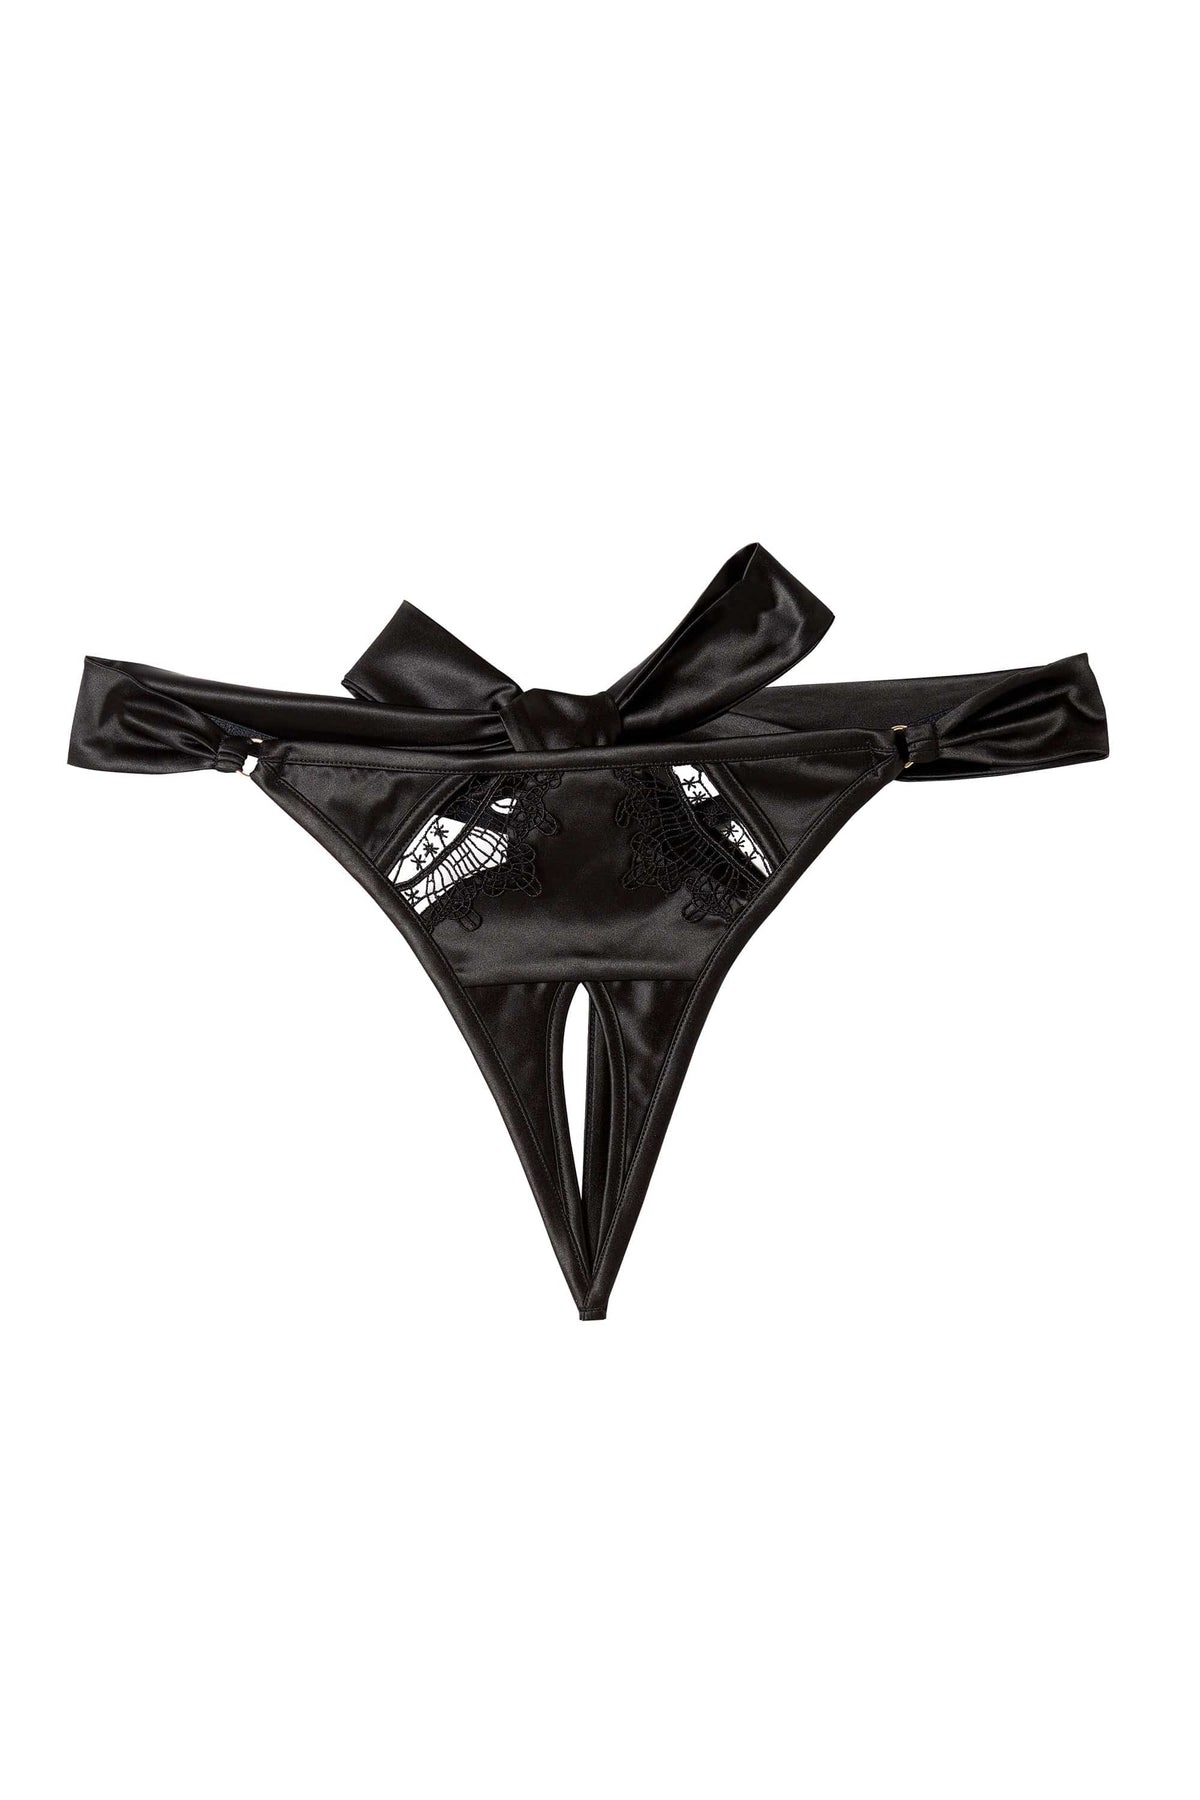 Playful Promises Wren Black Satin and Lace Ouvert Thong Panty